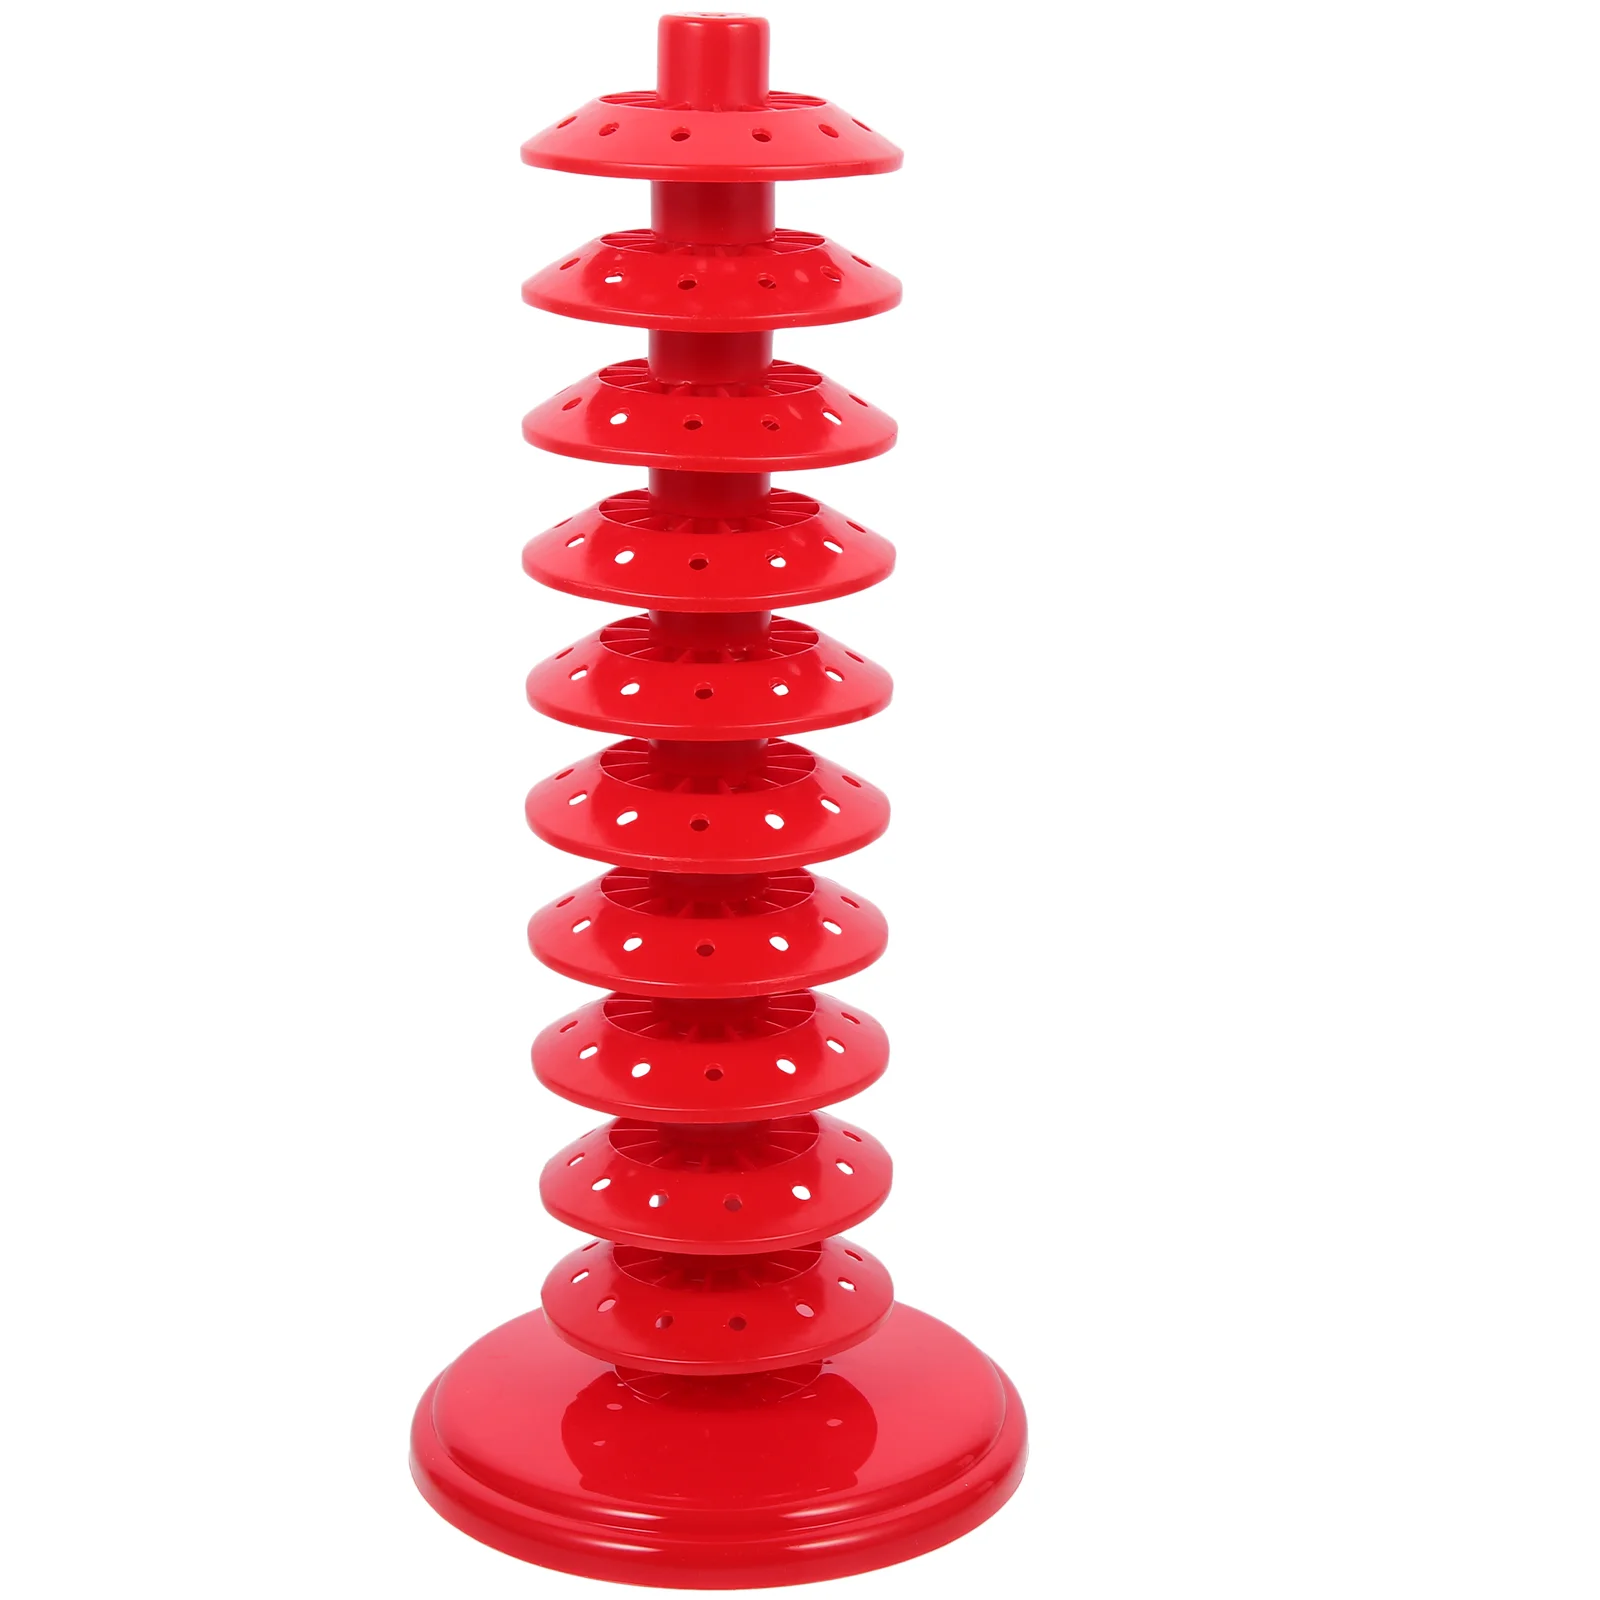 Lollipop Stand Cake Display Holder Tiered Rack Party Stands Dessert Decorative Sucker Drying Bracket Base Stick Candy Holders